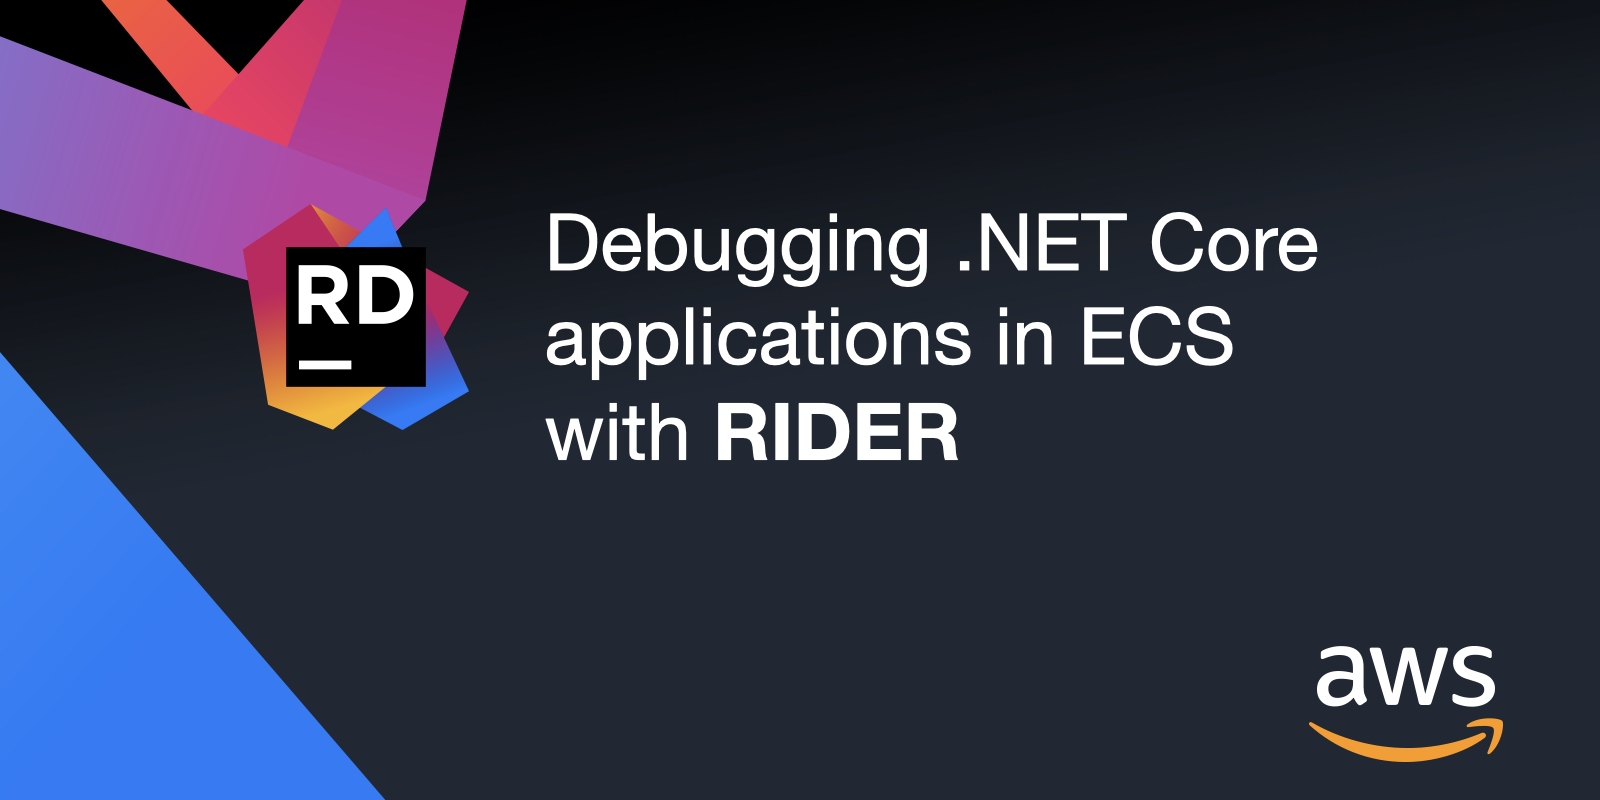 Debugging .NET Core applications in ECS with Rider